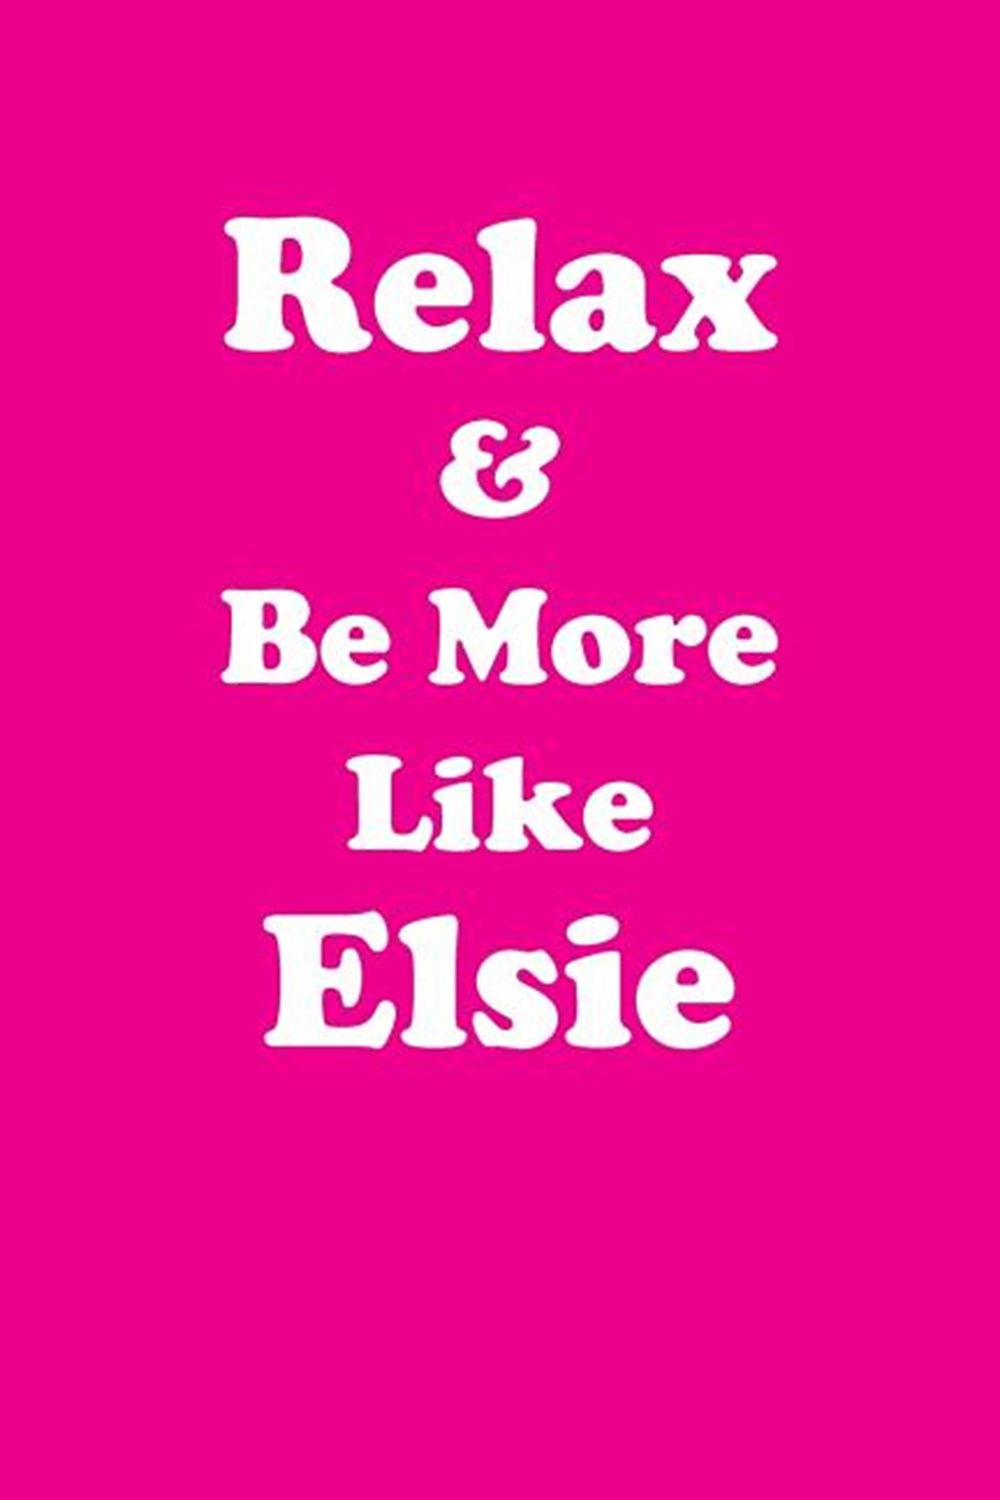 Relax & Be More Like Elsie Affirmations Workbook Positive Affirmations Workbook Includes Mentoring Q